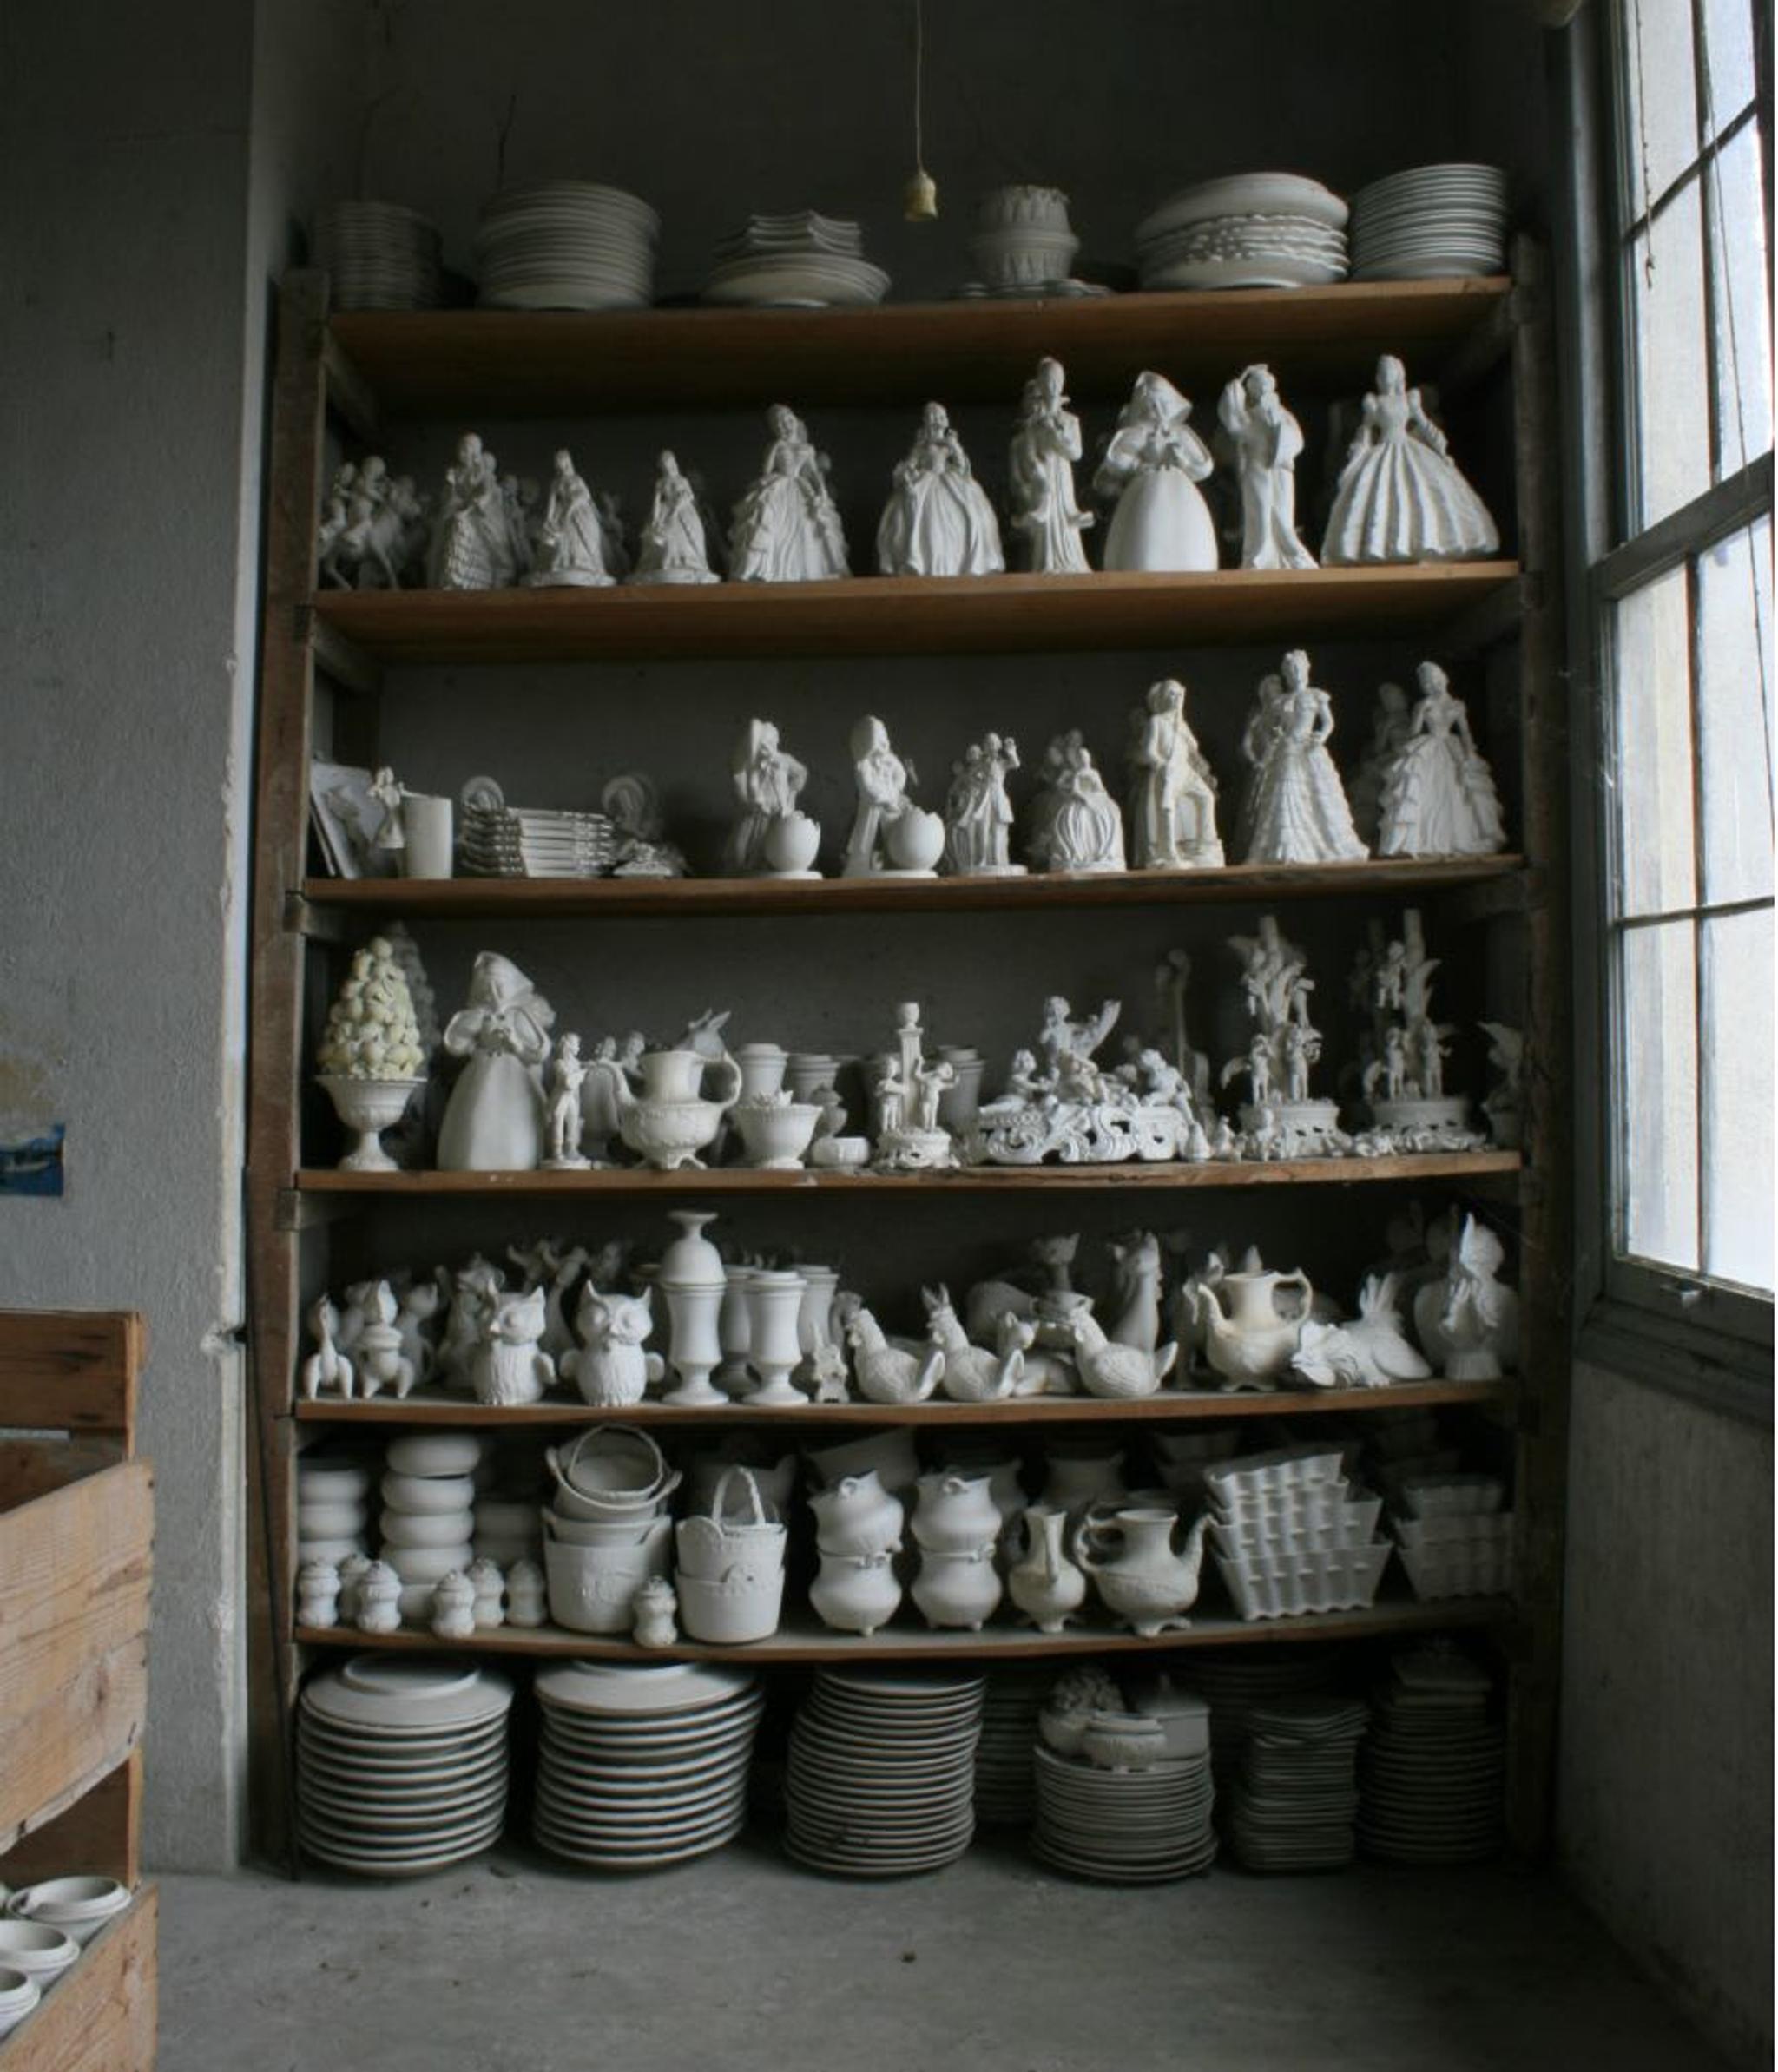 Some of Paolo Polloniato's beautiful ceramic pieces.